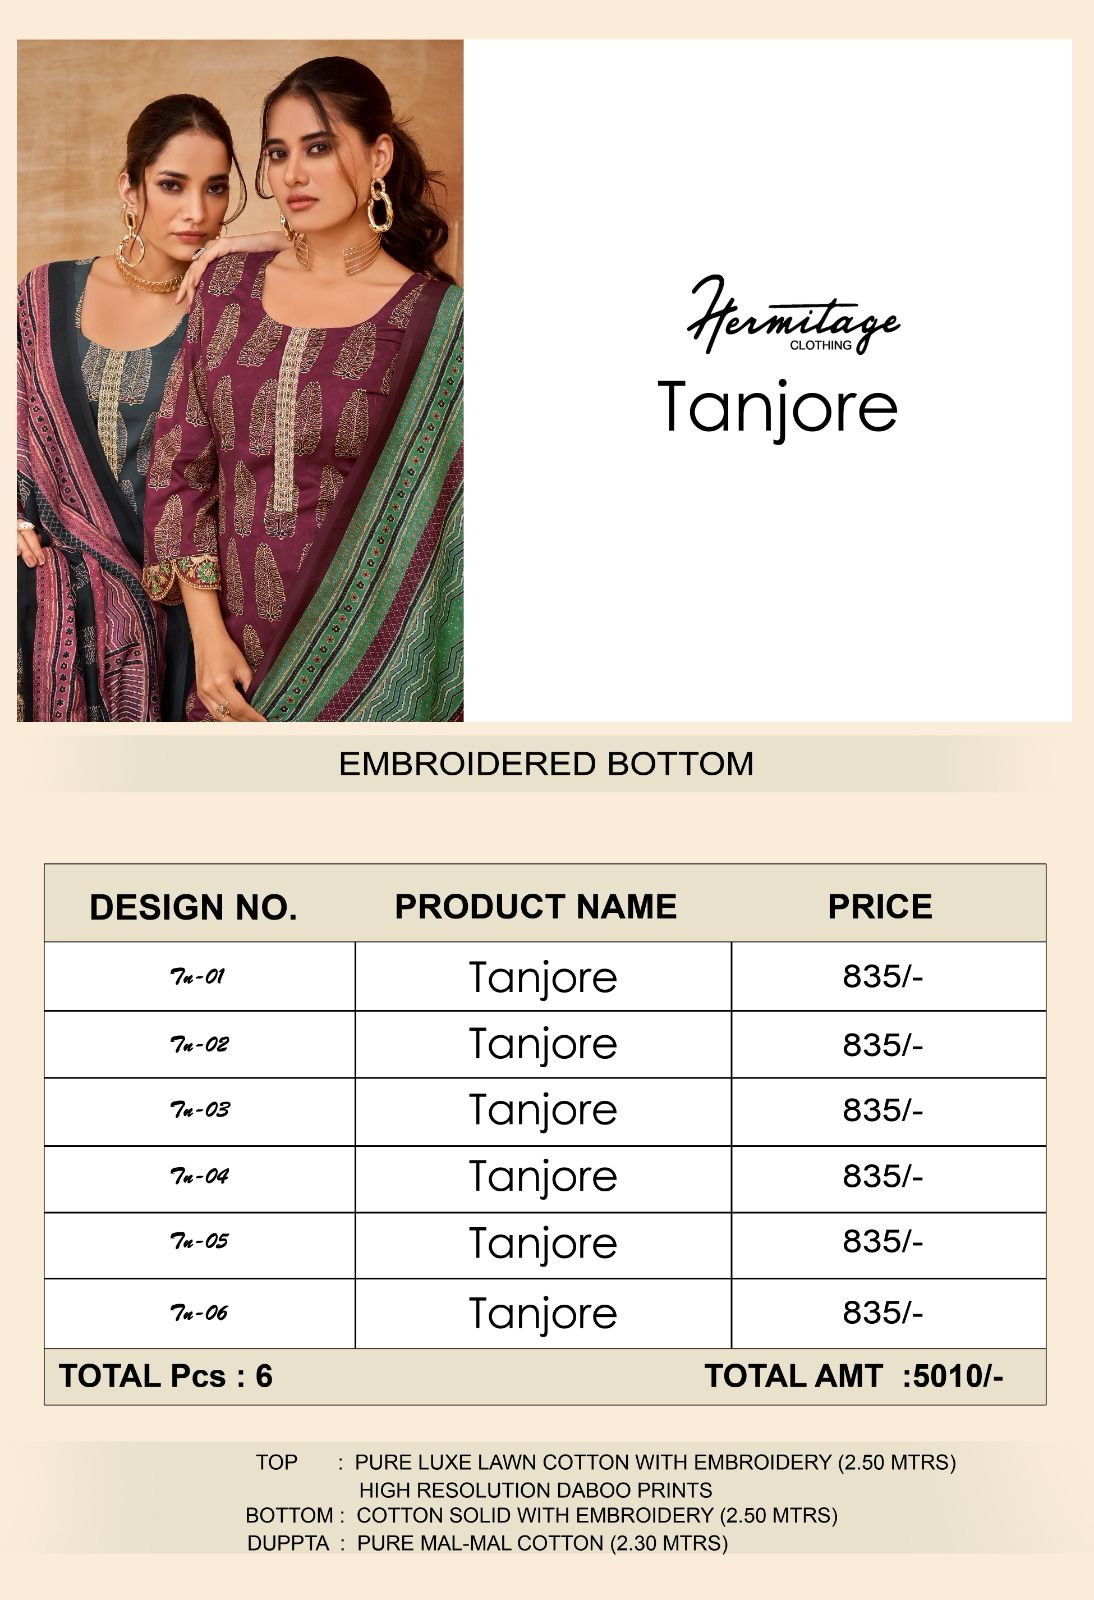 HERMITAGE TANJORE COTTON EMBROIDERED SUITS